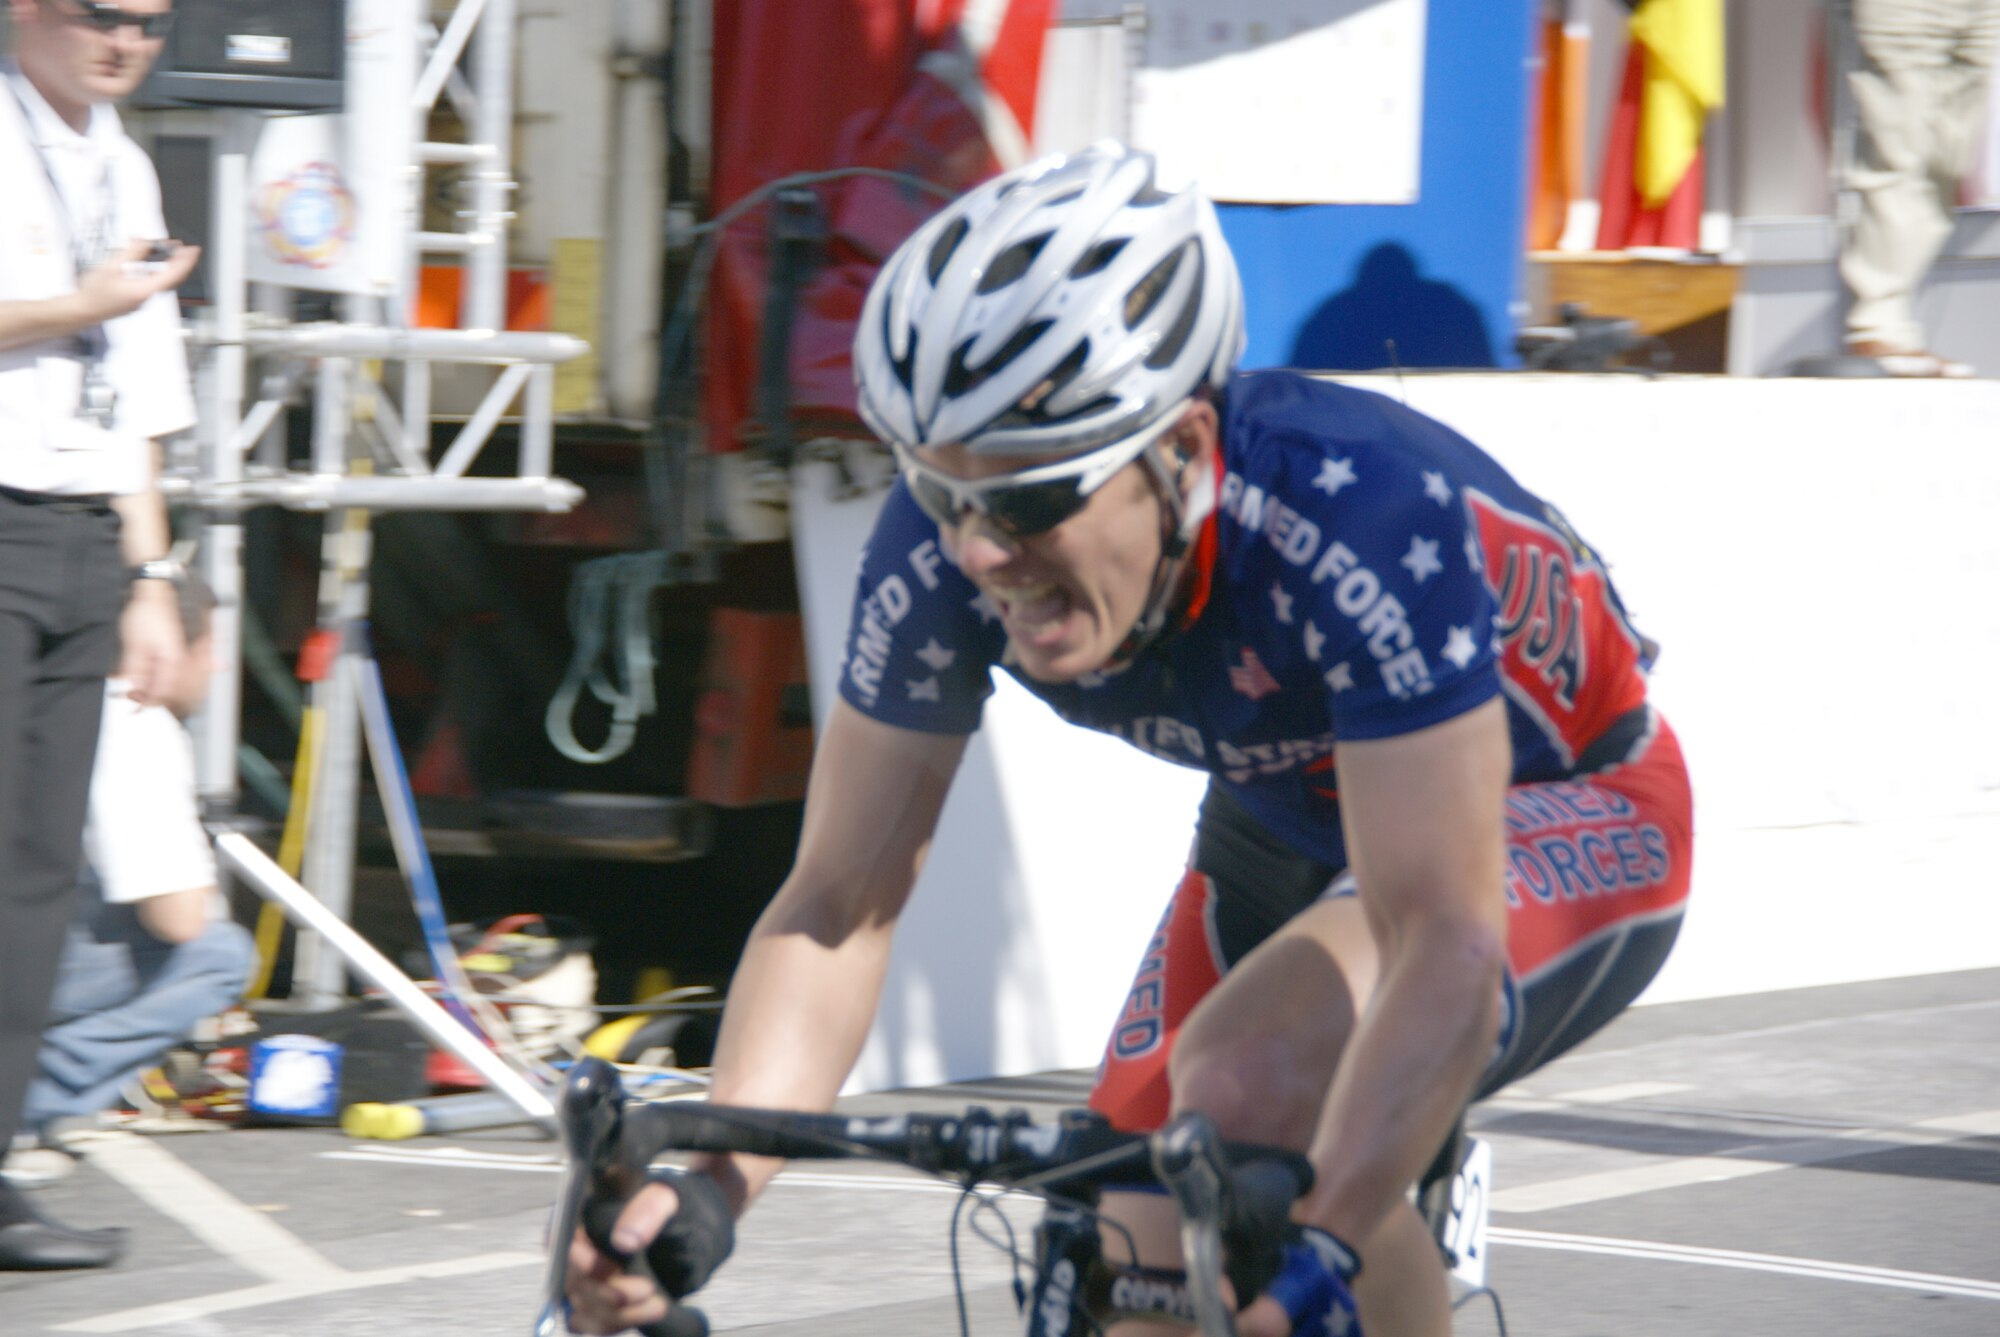 Capt. Ian Holt, a missile crewmember with the 319th Missile Squadron at F.E. Warren Air Force Base, Wyo., races for the United States cycling team at an international competition in Clonmel, Ireland, during the summer of 2009. Captain Holt trained and lived in Europe for one year while training for the event.  (U.S. Air Force photo)
             